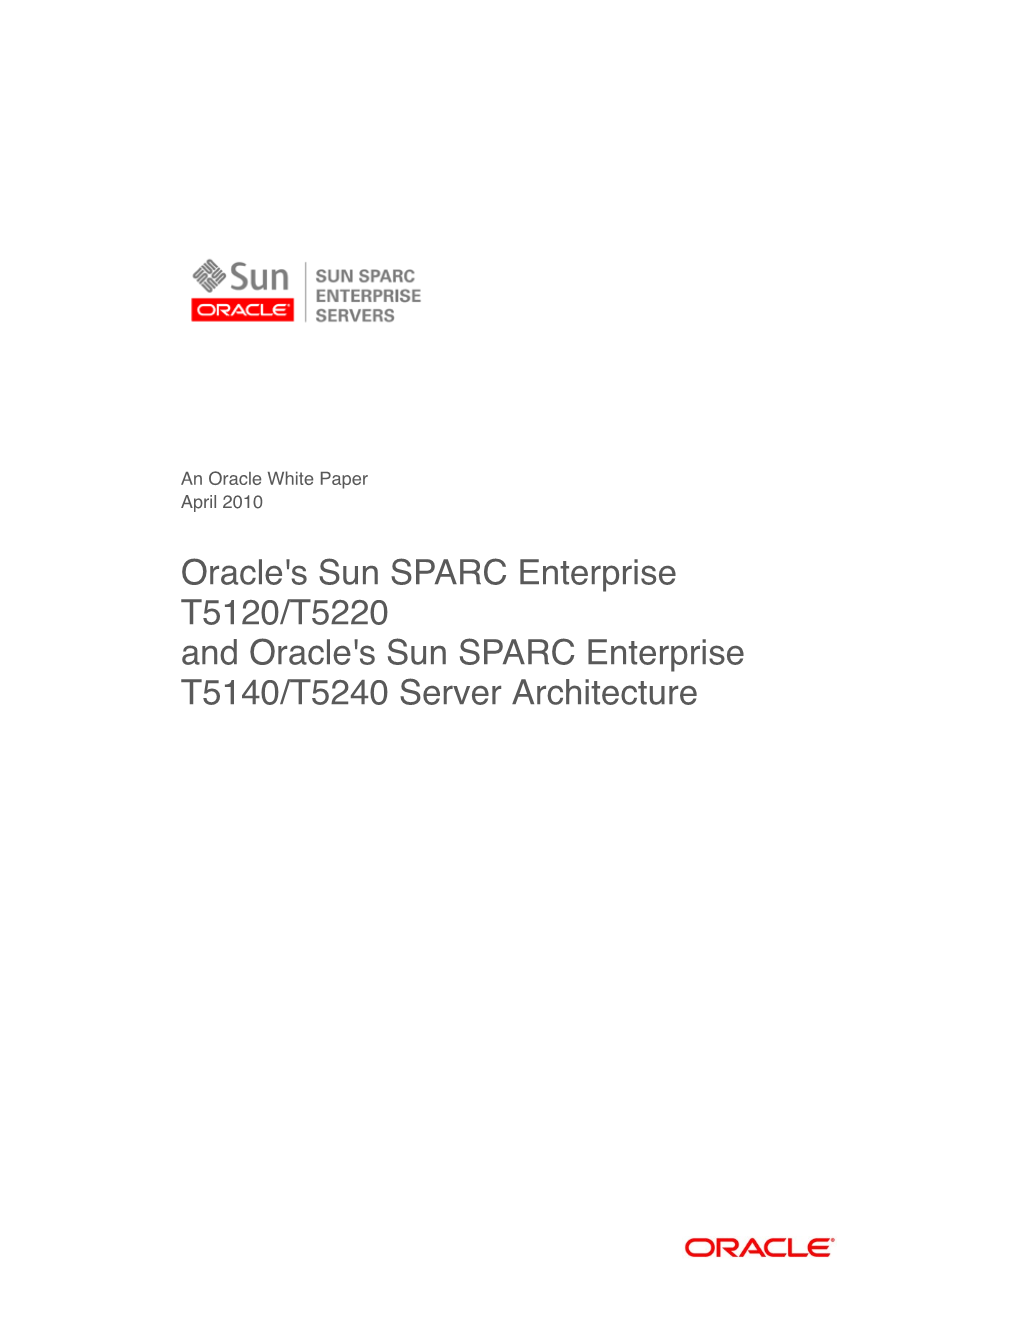 SPARC T5120/T5220 Servers by Providing a Pcie Root Complex Associated with Each Socket